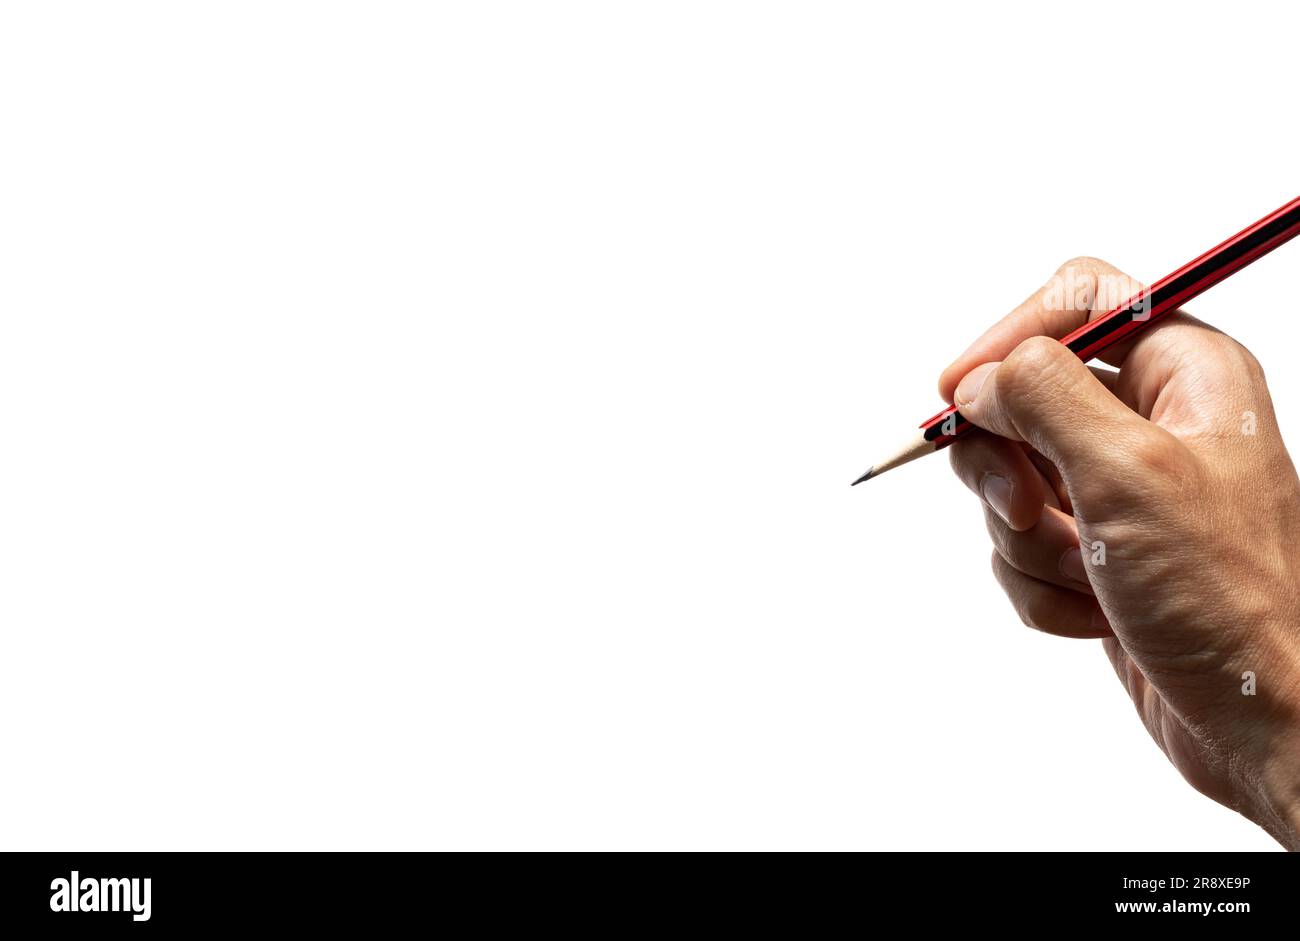 Right hand holding a pencil on isolated white, after some edits. Stock Photo